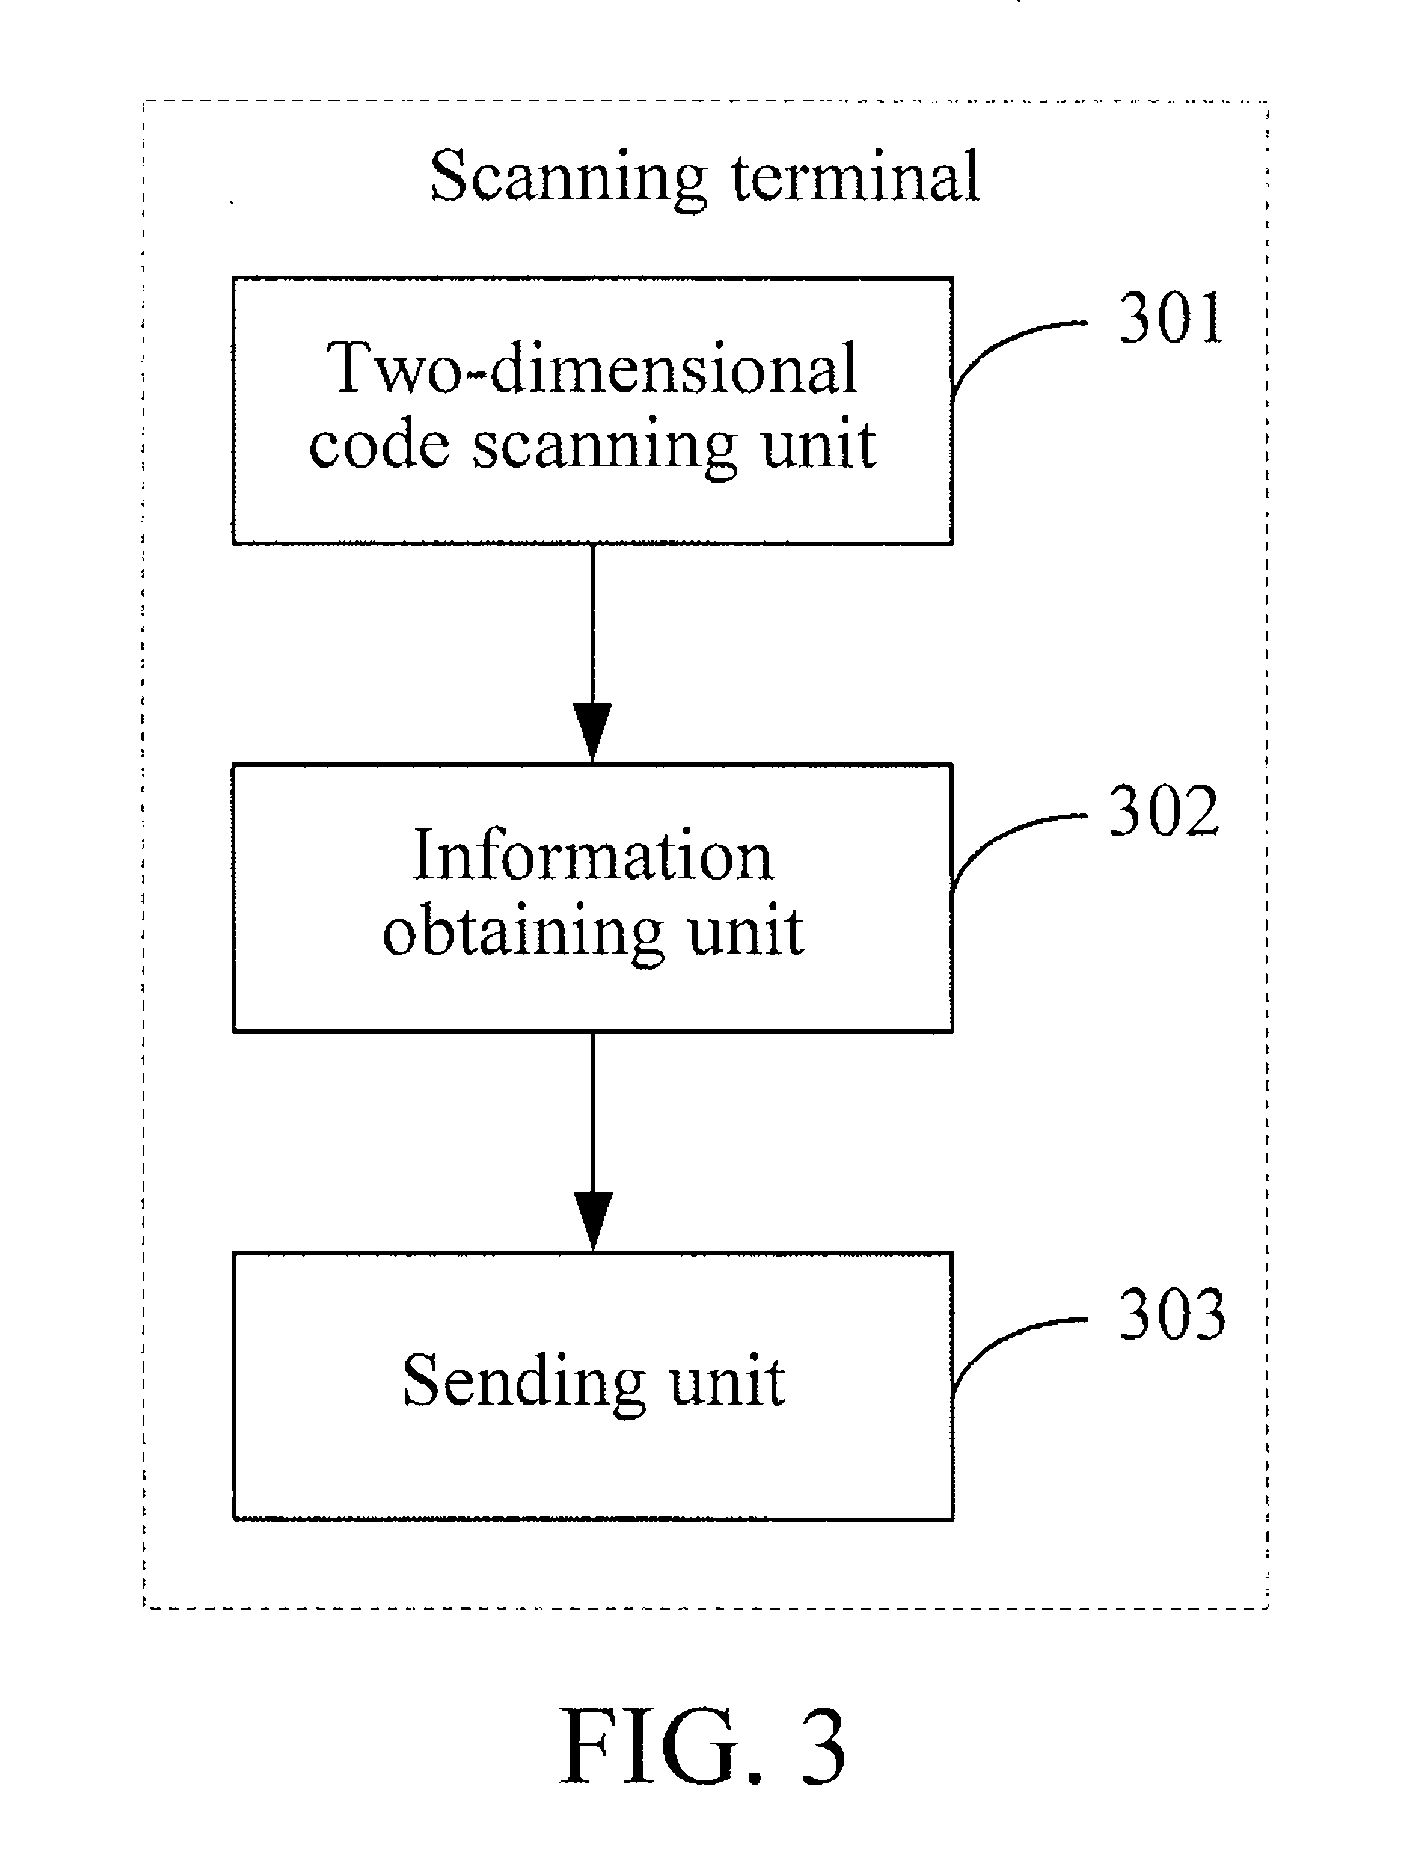 Check-in method and system based on two-dimensional code, scanning terminal, and display terminal